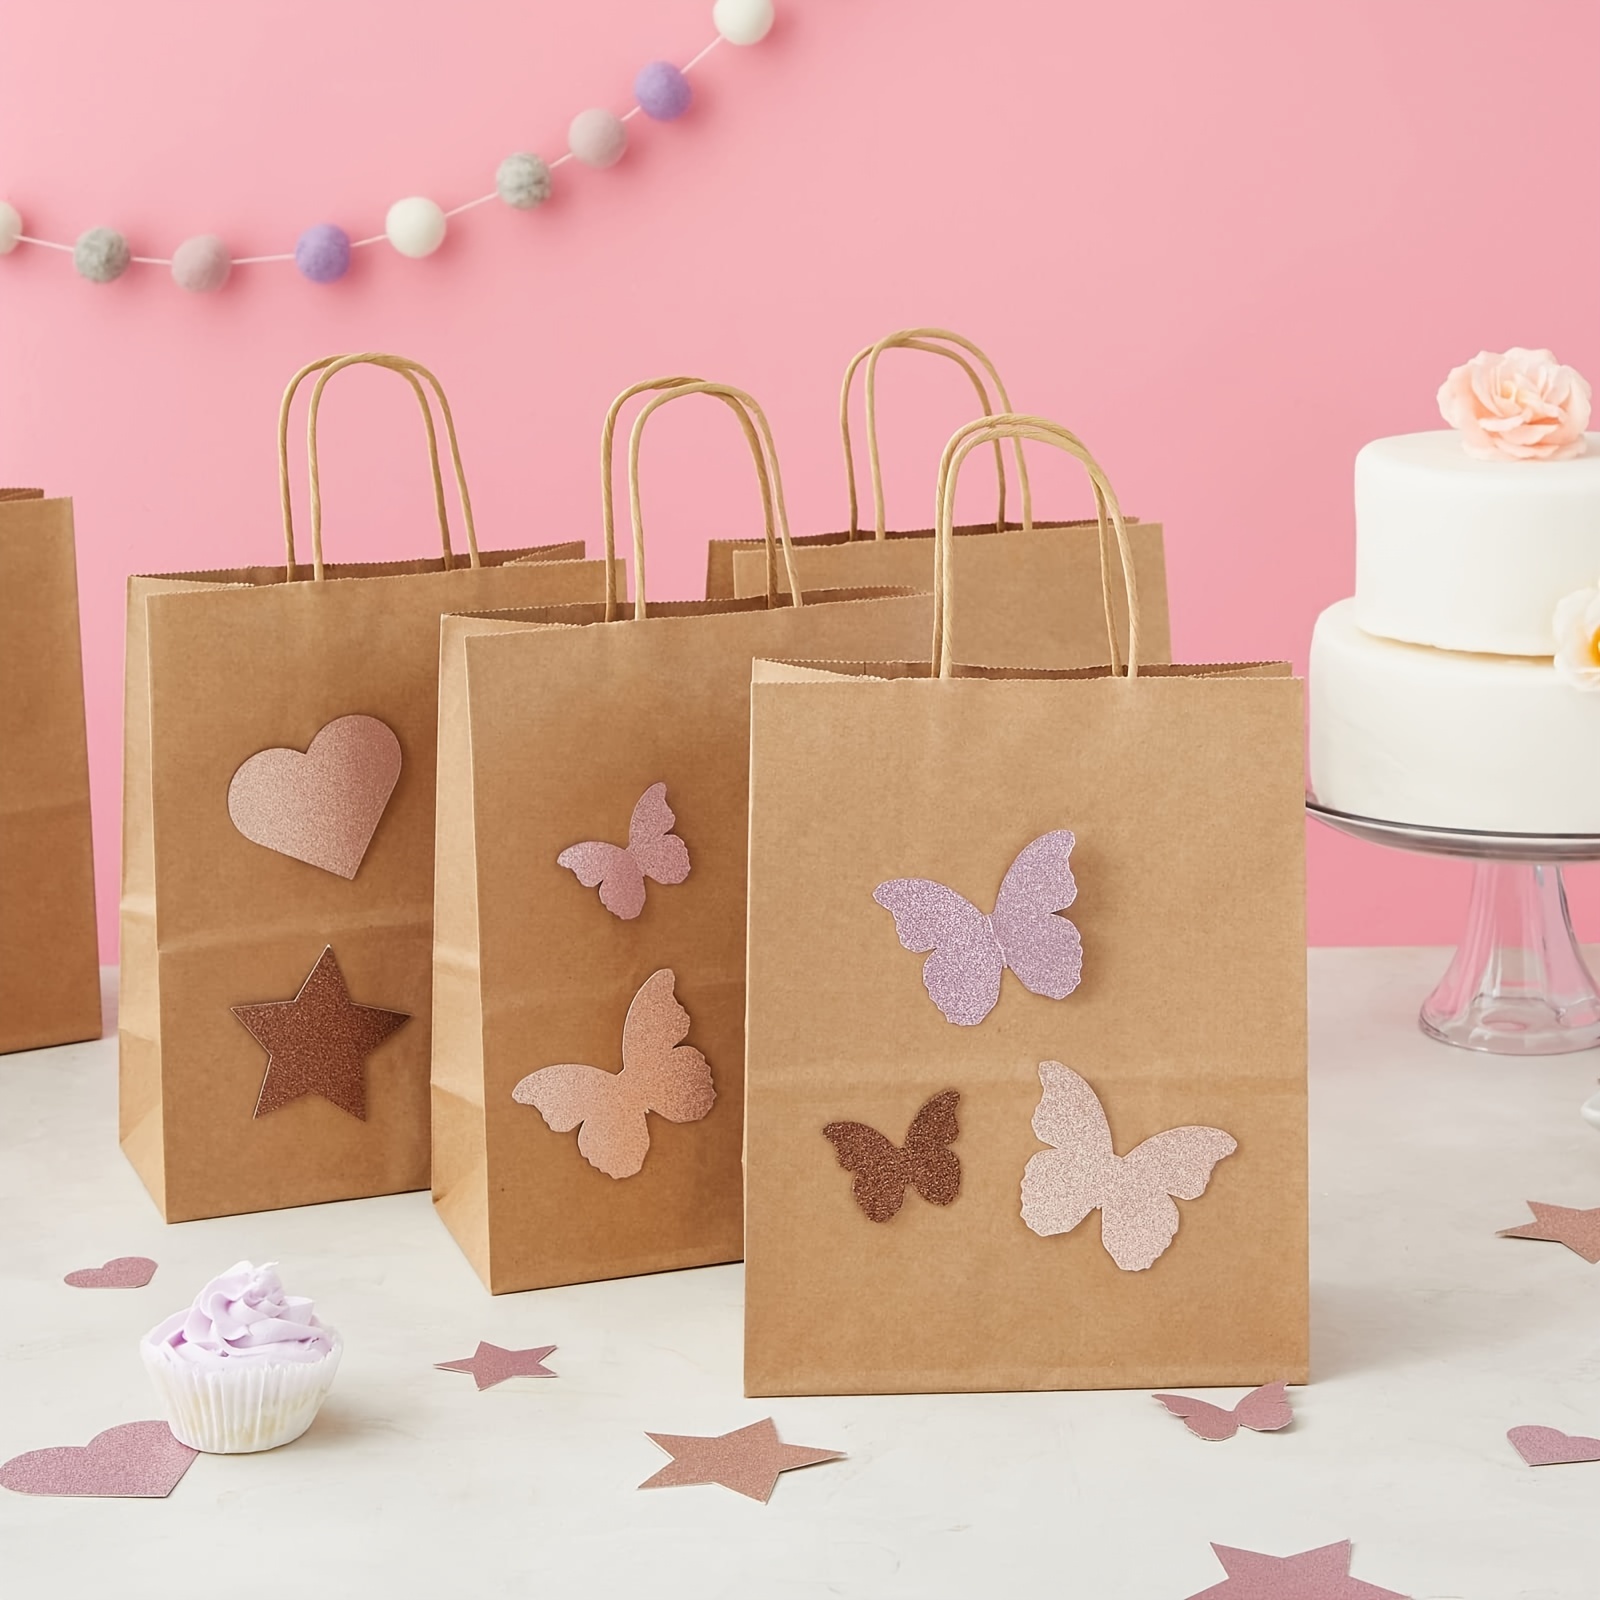 

fantasy-inspired" 30-piece Kraft Paper Gift Bags With Handles - 8.3x5.9x3.1" - Perfect For Party Favors, Mother's & Father's Day Goodies, Retail Shopping - Light Brown/black